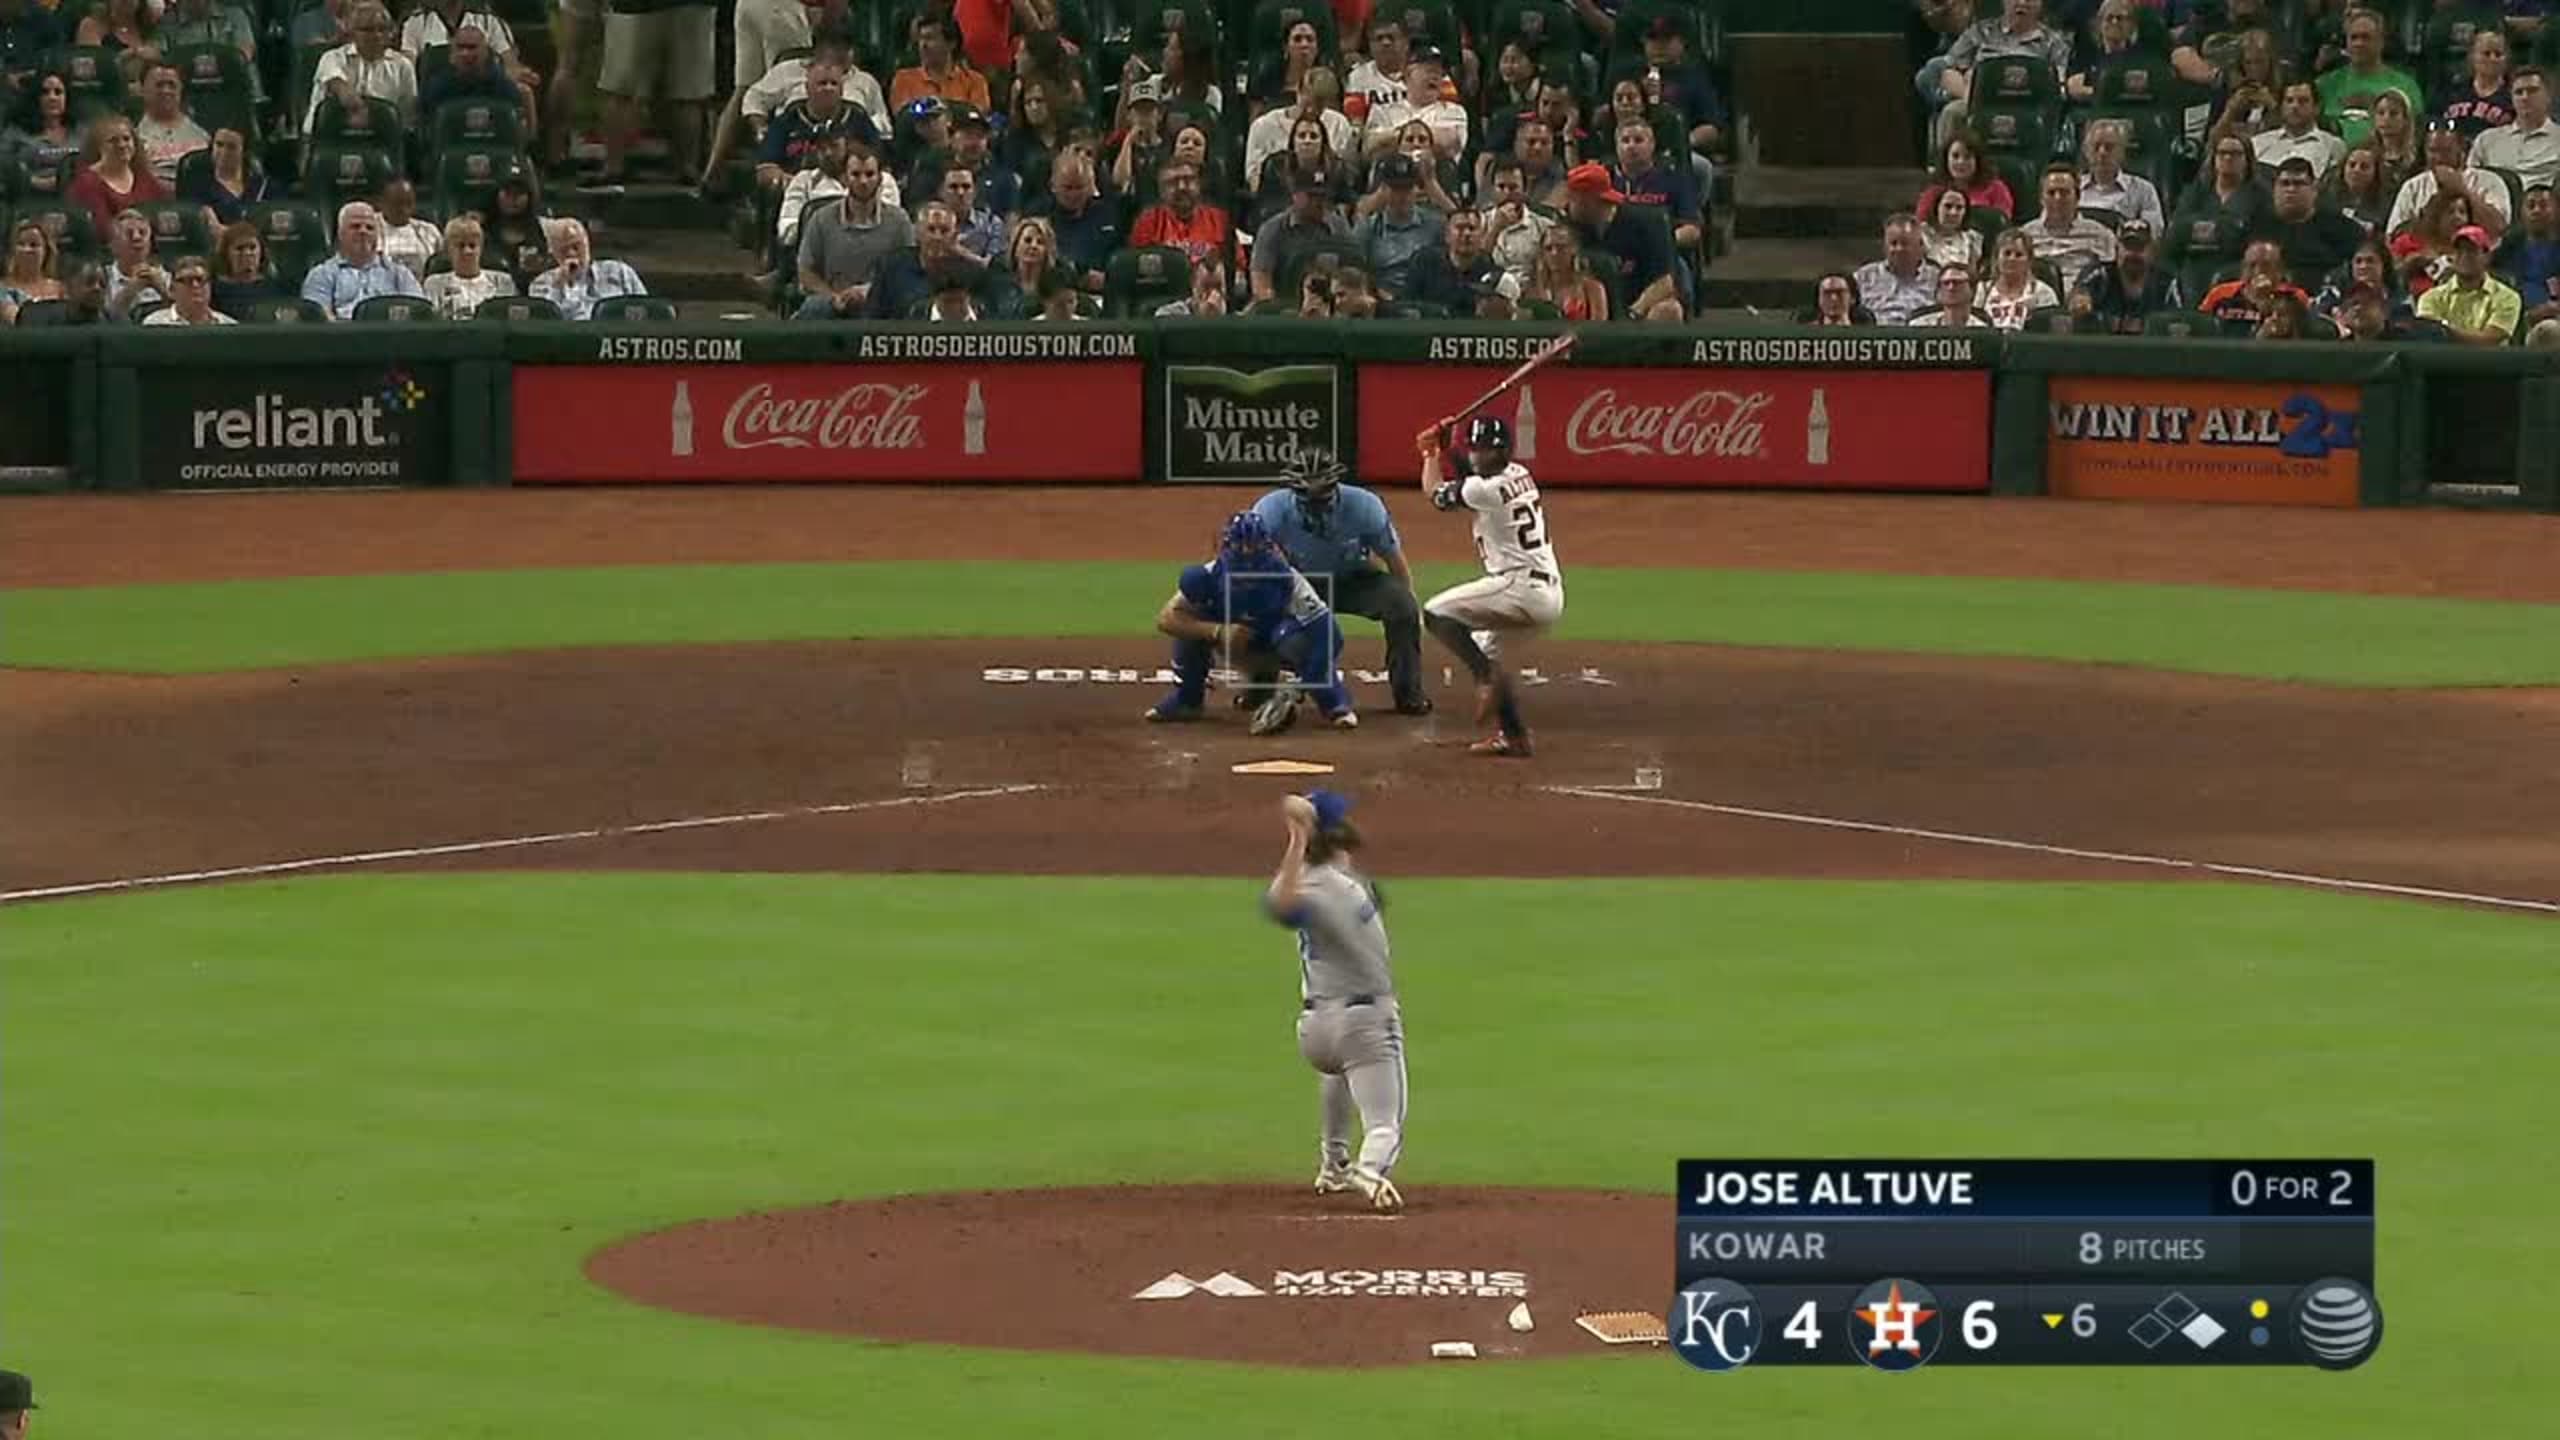 Jose Altuve's penchant for hitting exceeded by his desire to